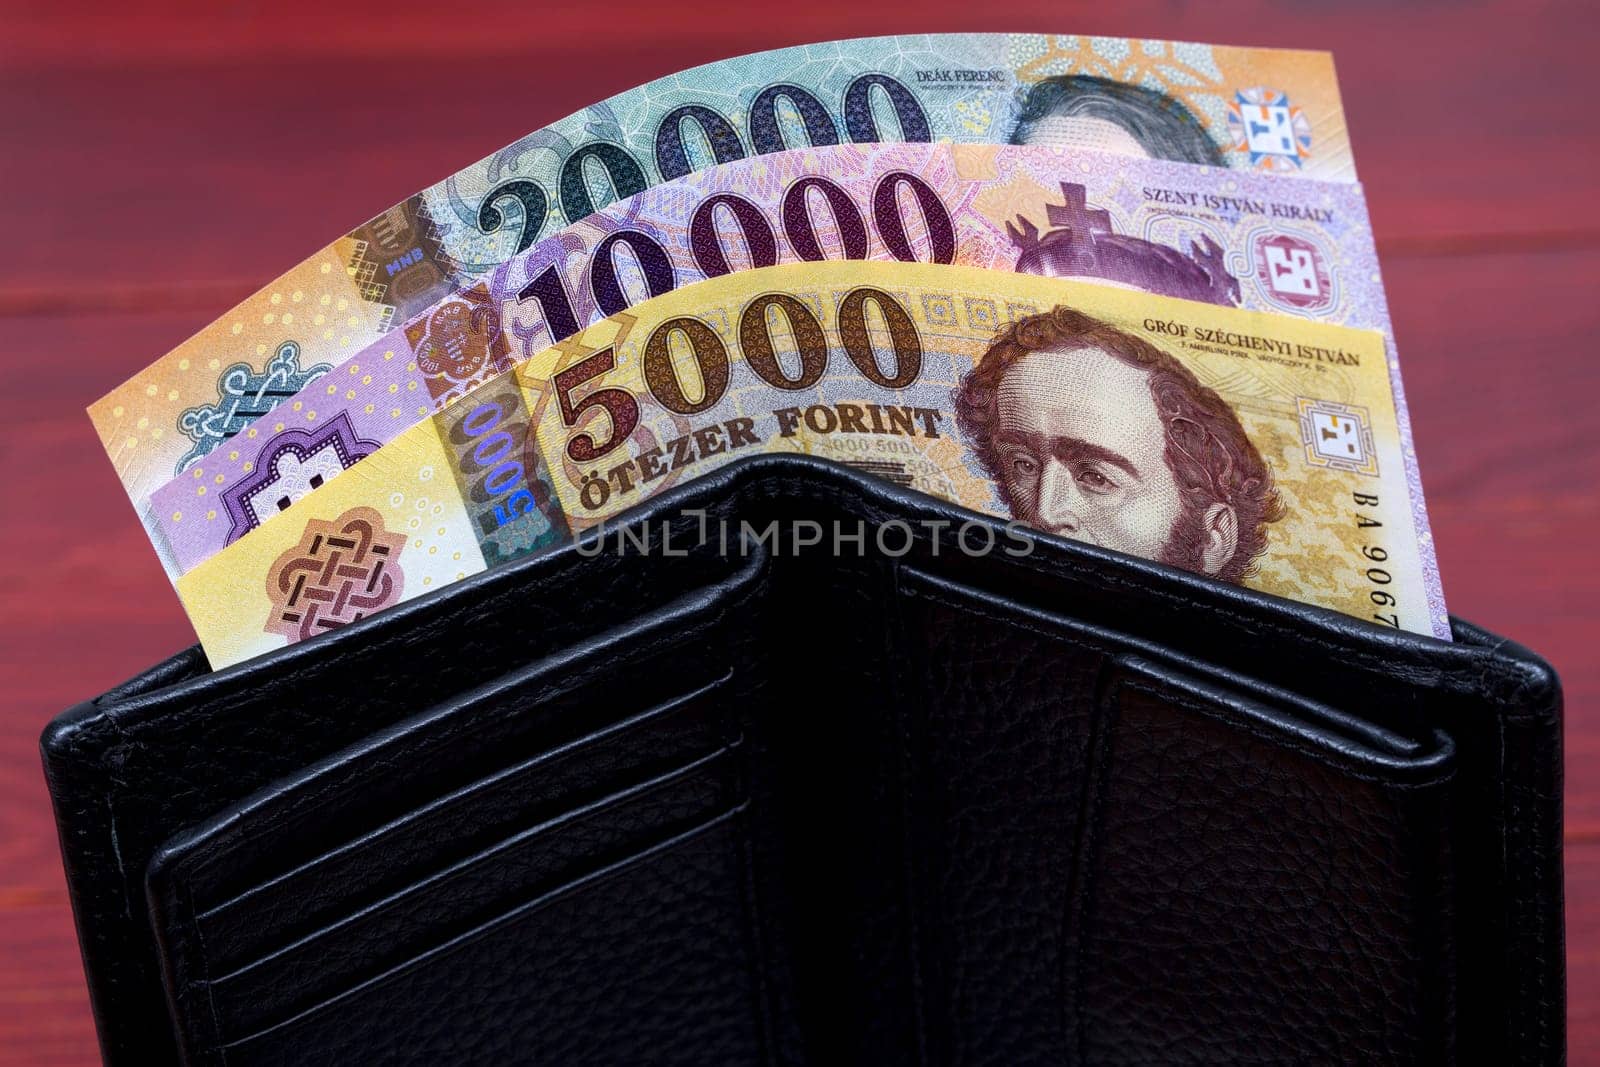 Hungarian money - forint in the black wallet